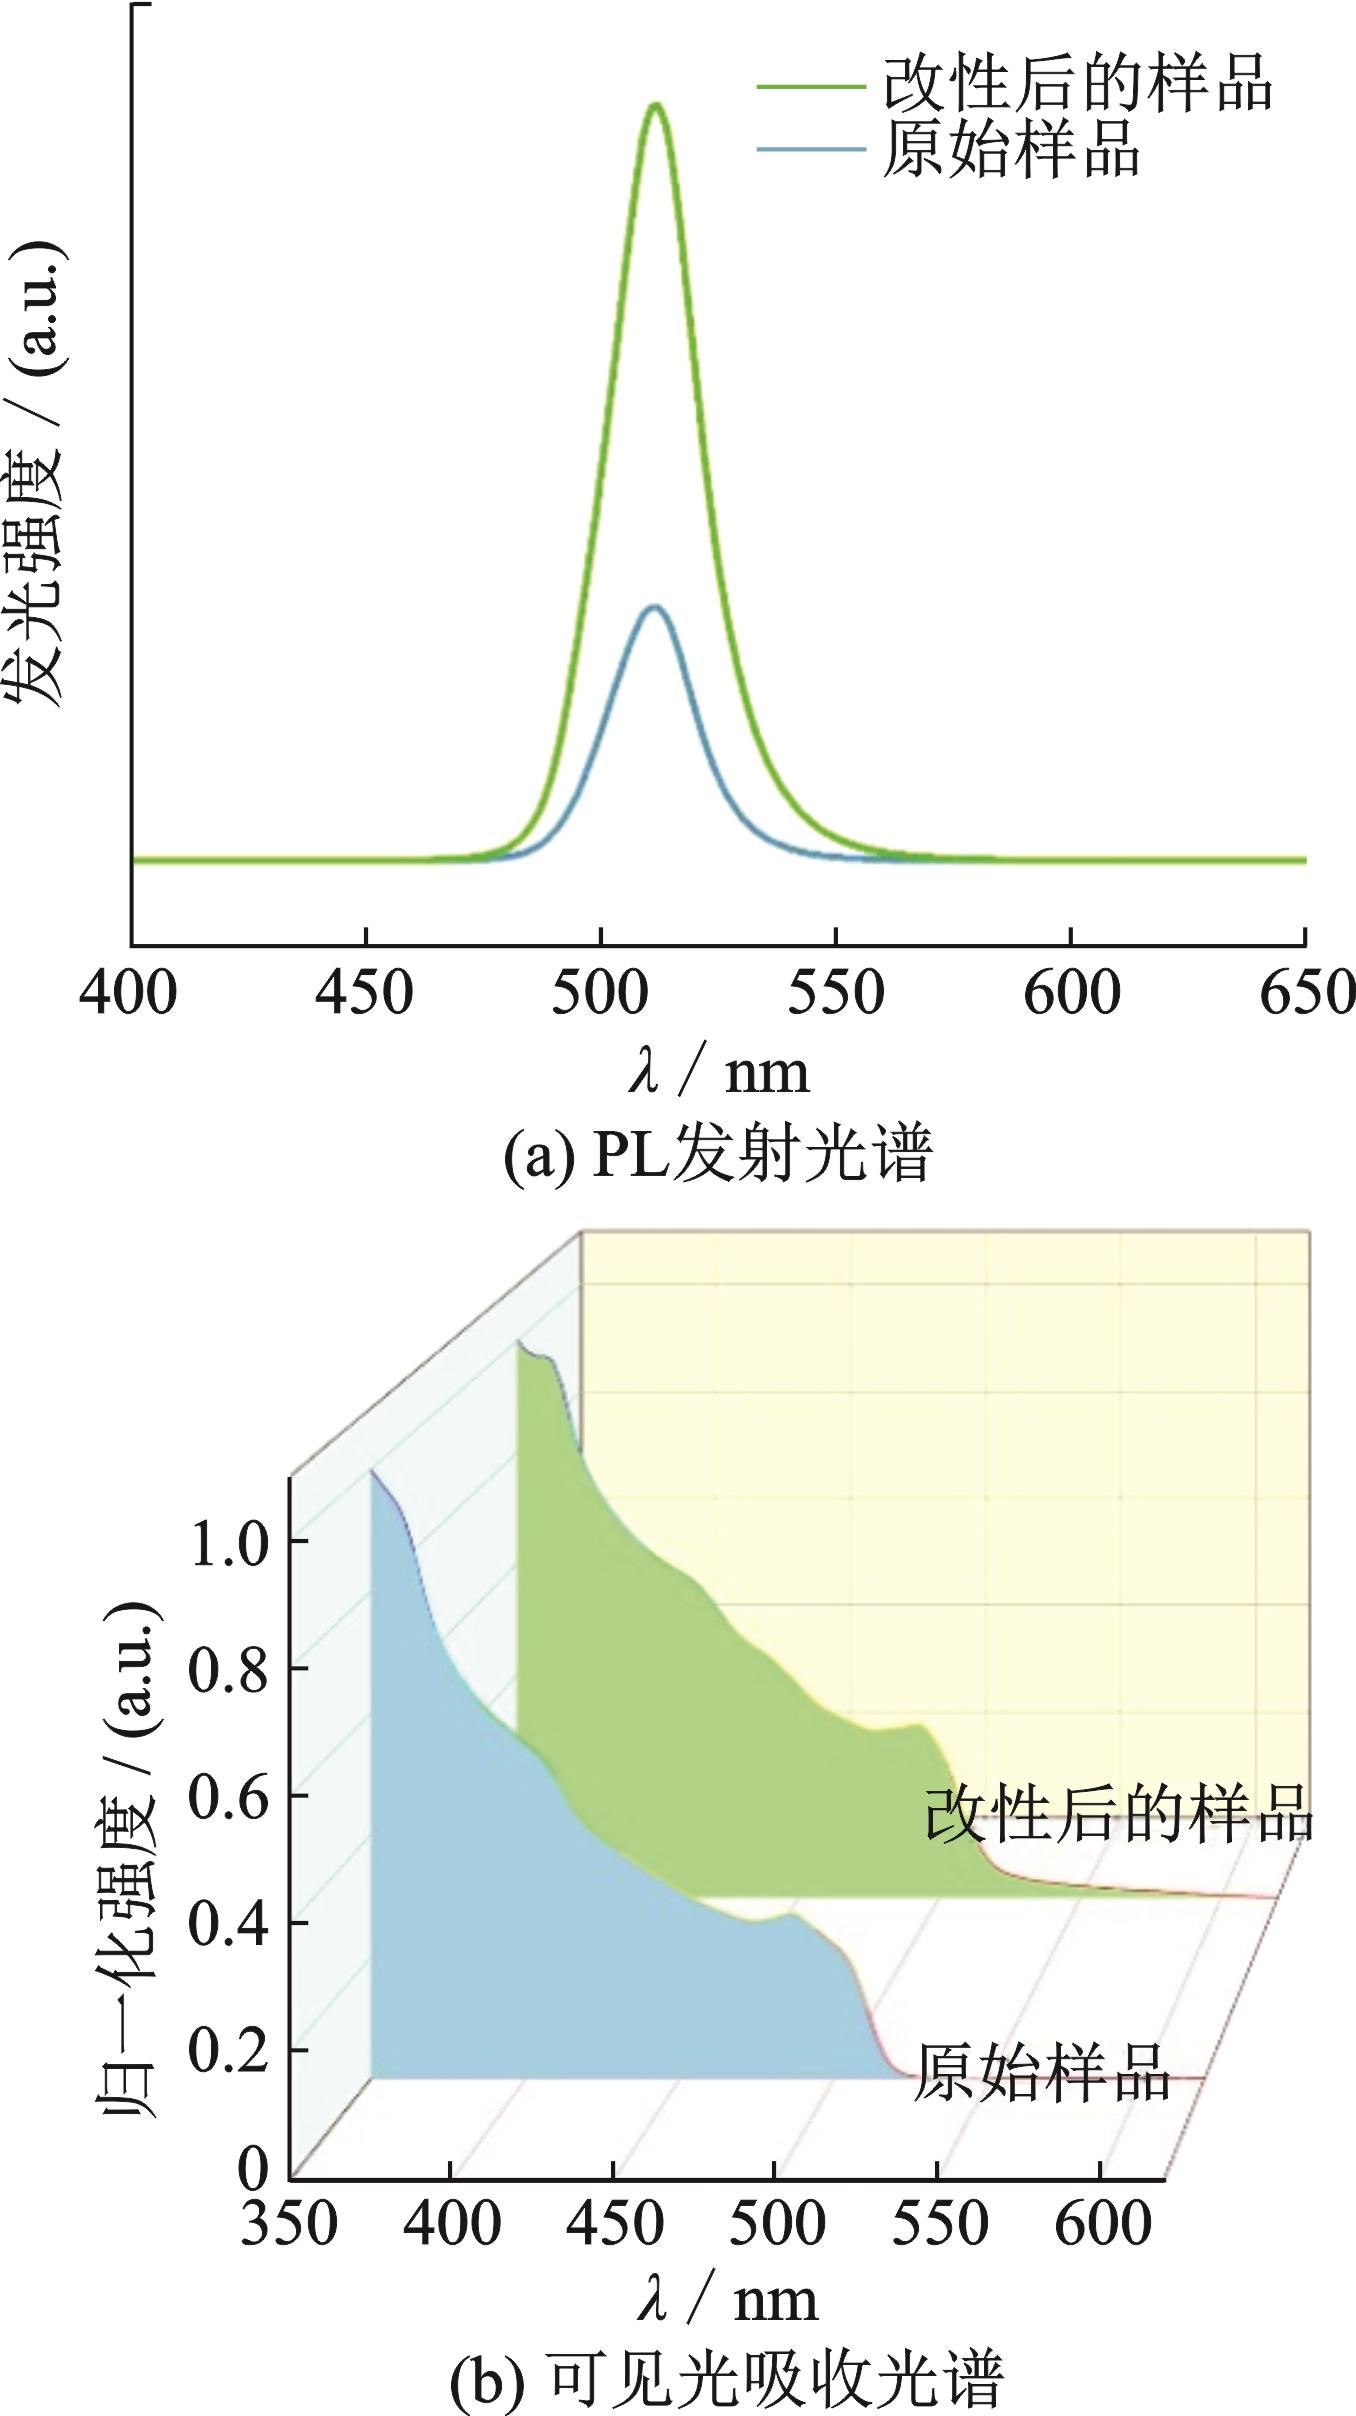 Photo luminescence spectra of the original sample and modified quantum dots